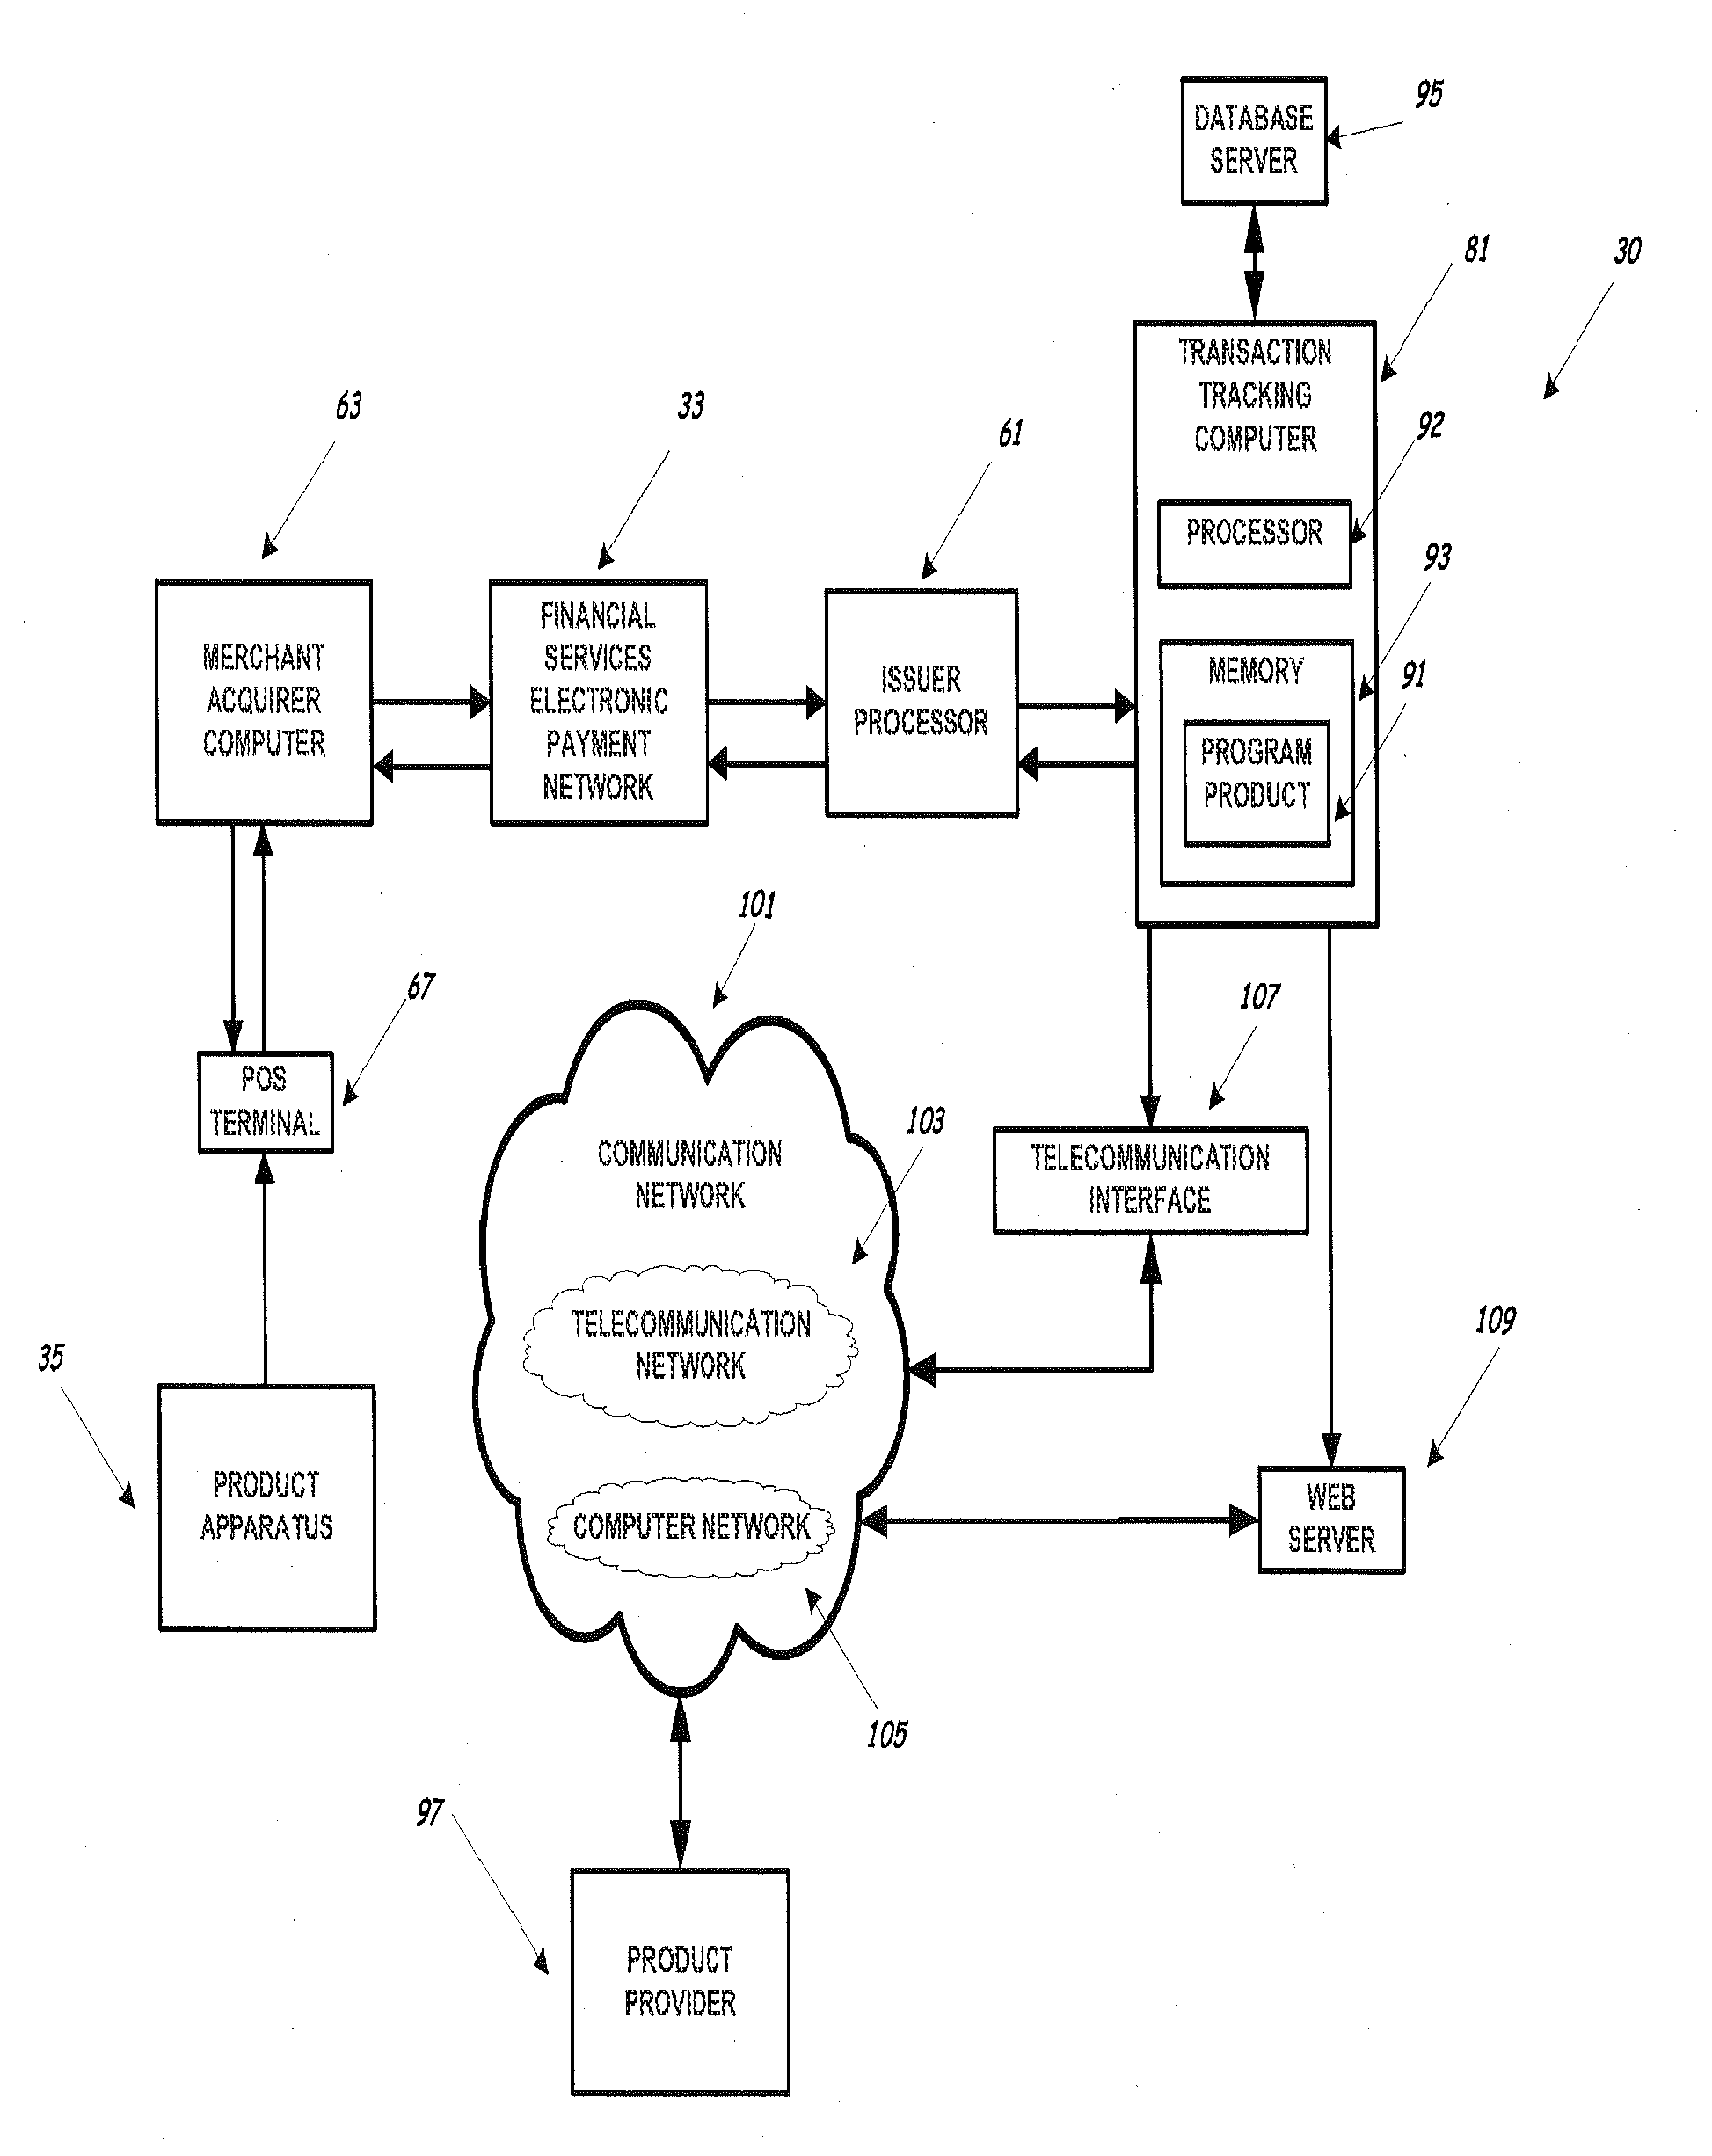 Machine, methods, and program product for electronic inventory tracking